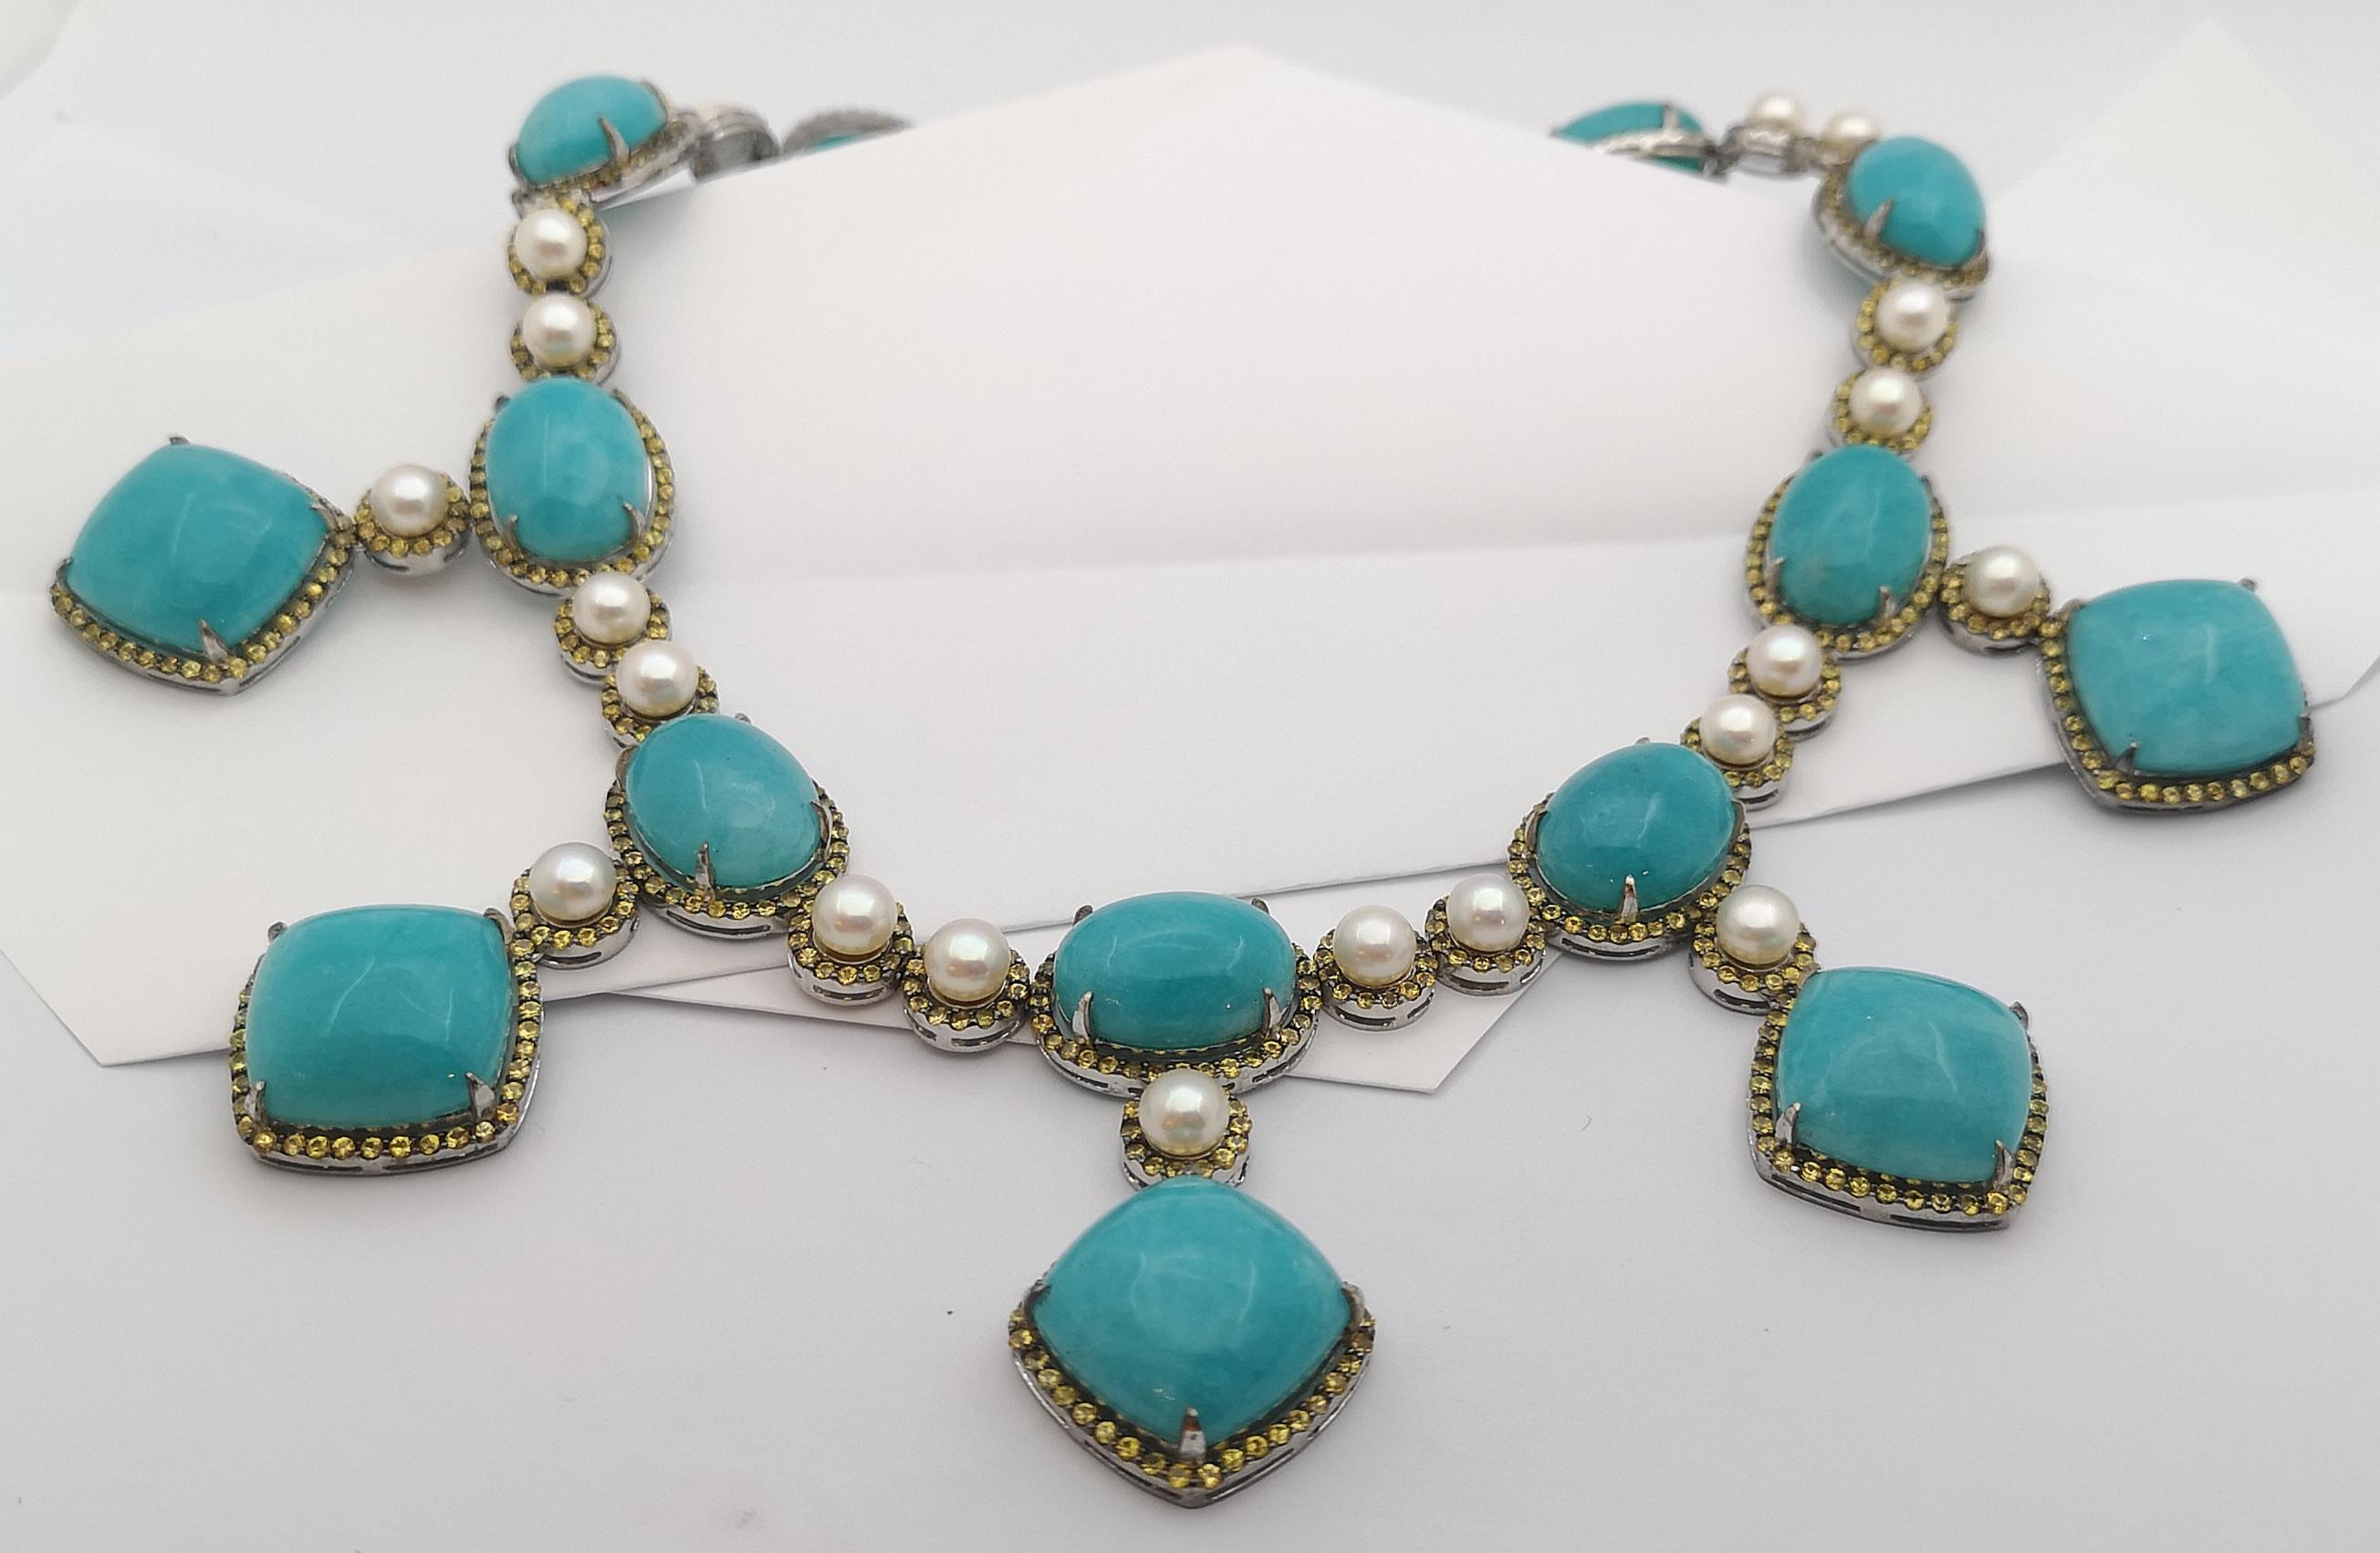 Amazonite, Yellow Sapphire and Pearl Necklace set in Silver Settings

Width:  6.0 cm 
Length:  45.0 cm
Total Weight: 150.84 grams

*Please note that the silver setting is plated with rhodium to promote shine and help prevent oxidation.  However,